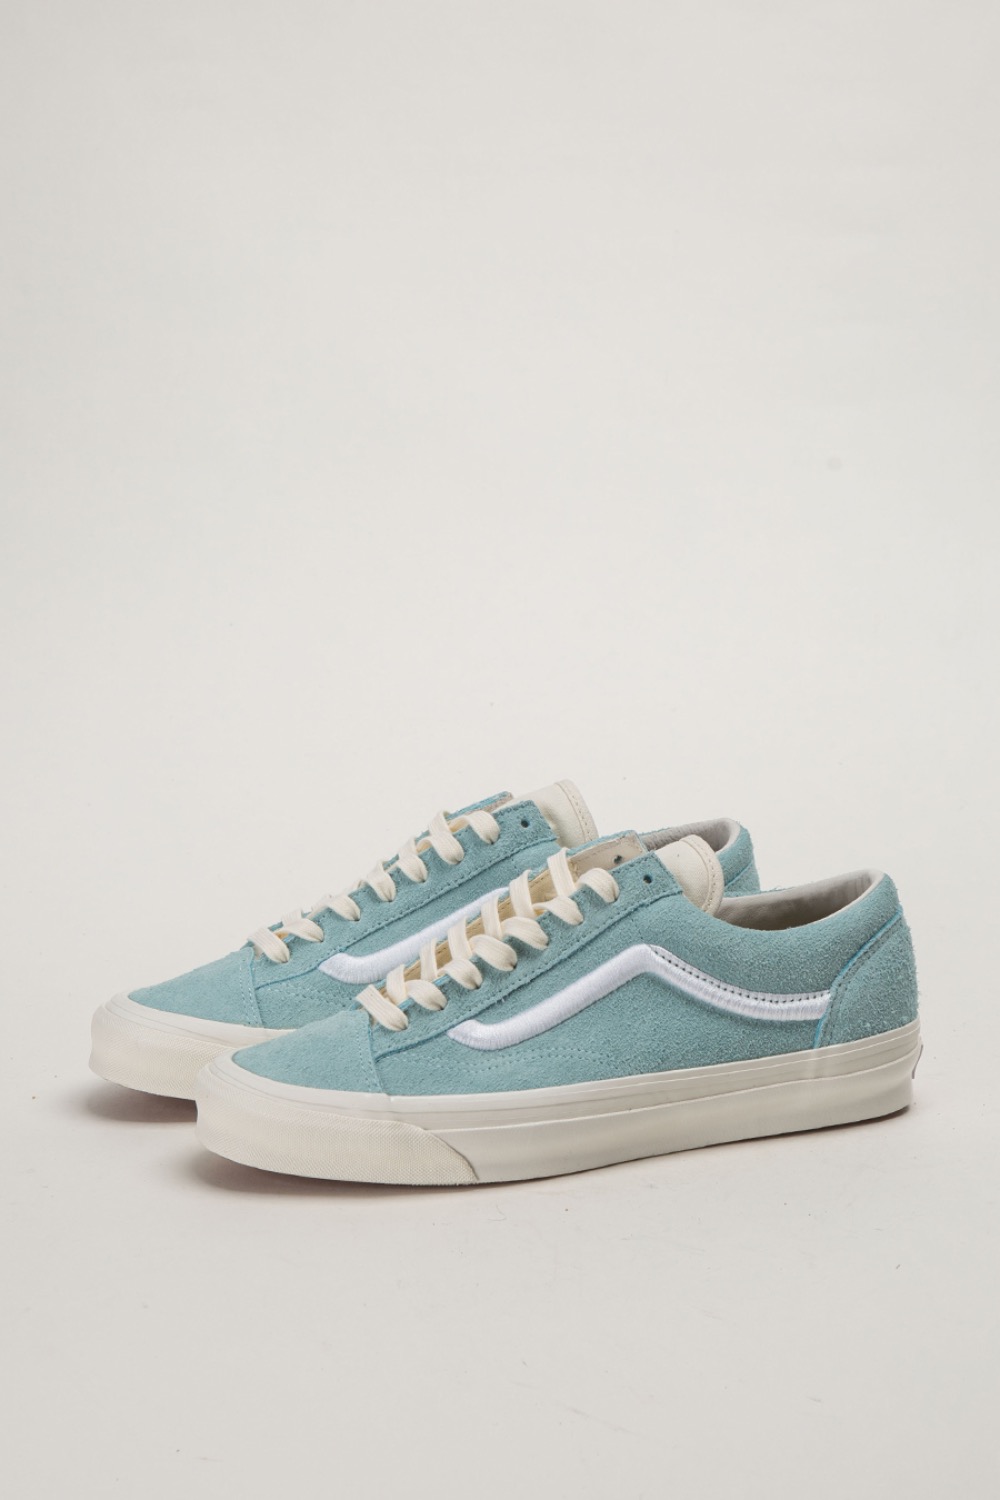 OG STYLE 36 LX COOPERSTOWN CANAL BLUE